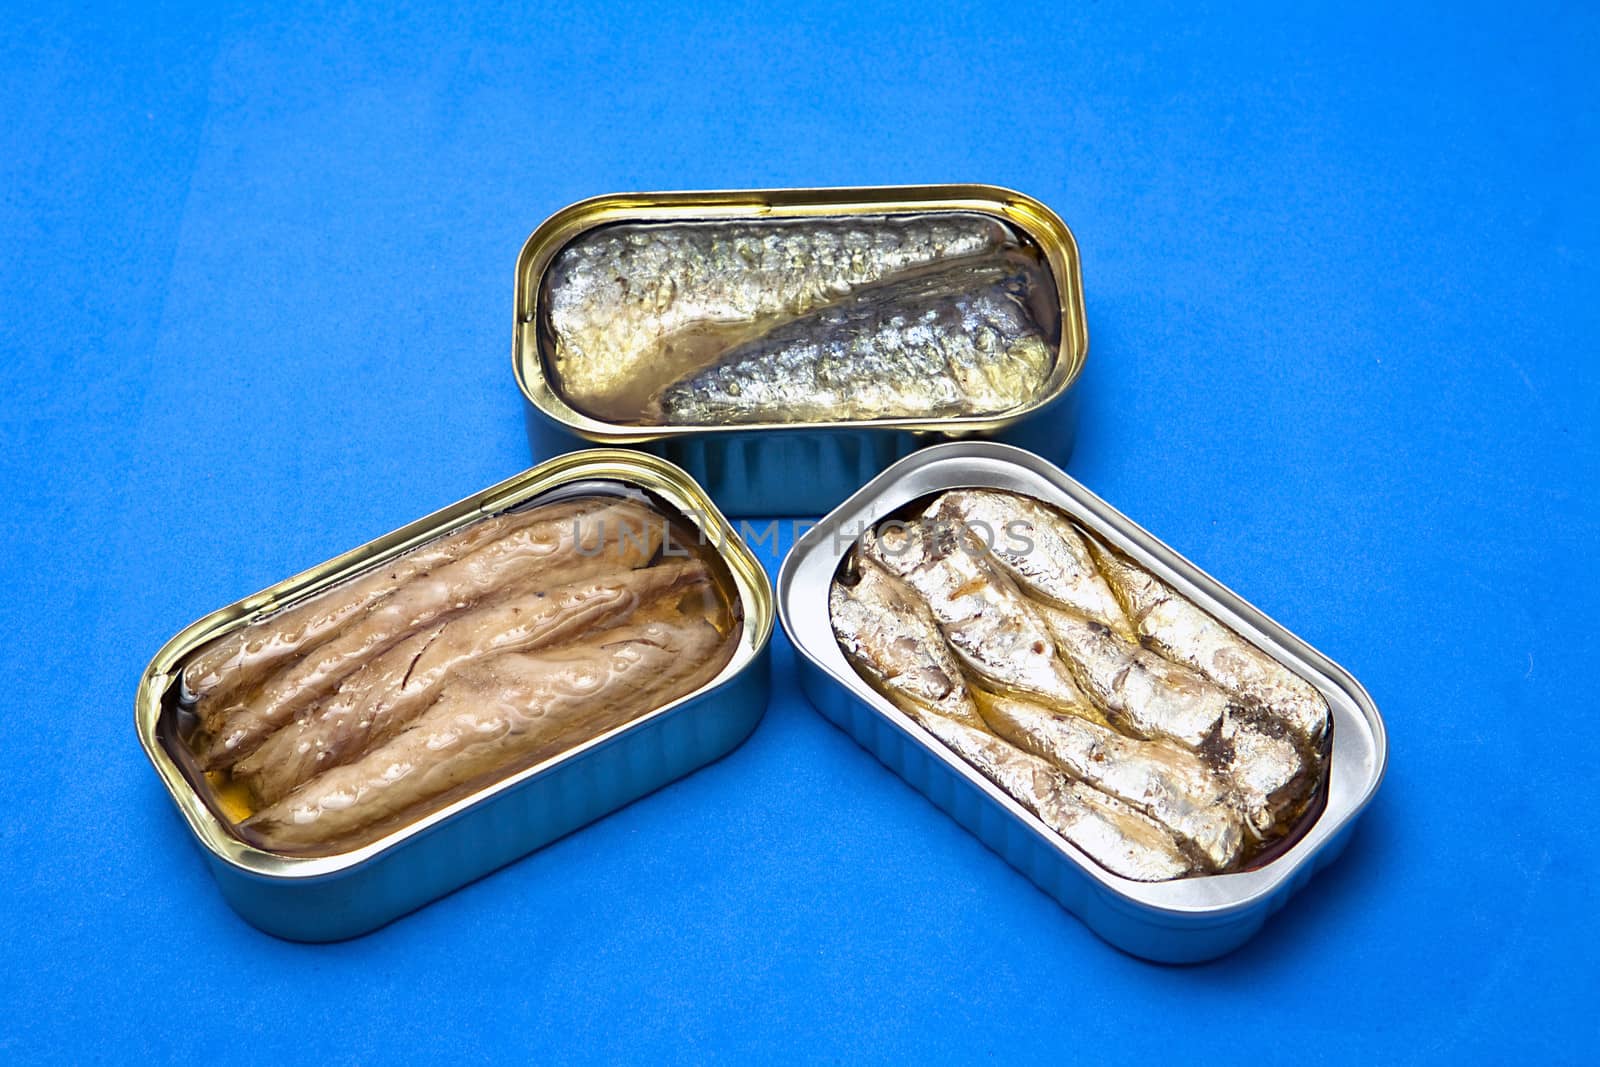 Tins of different sizes and opening